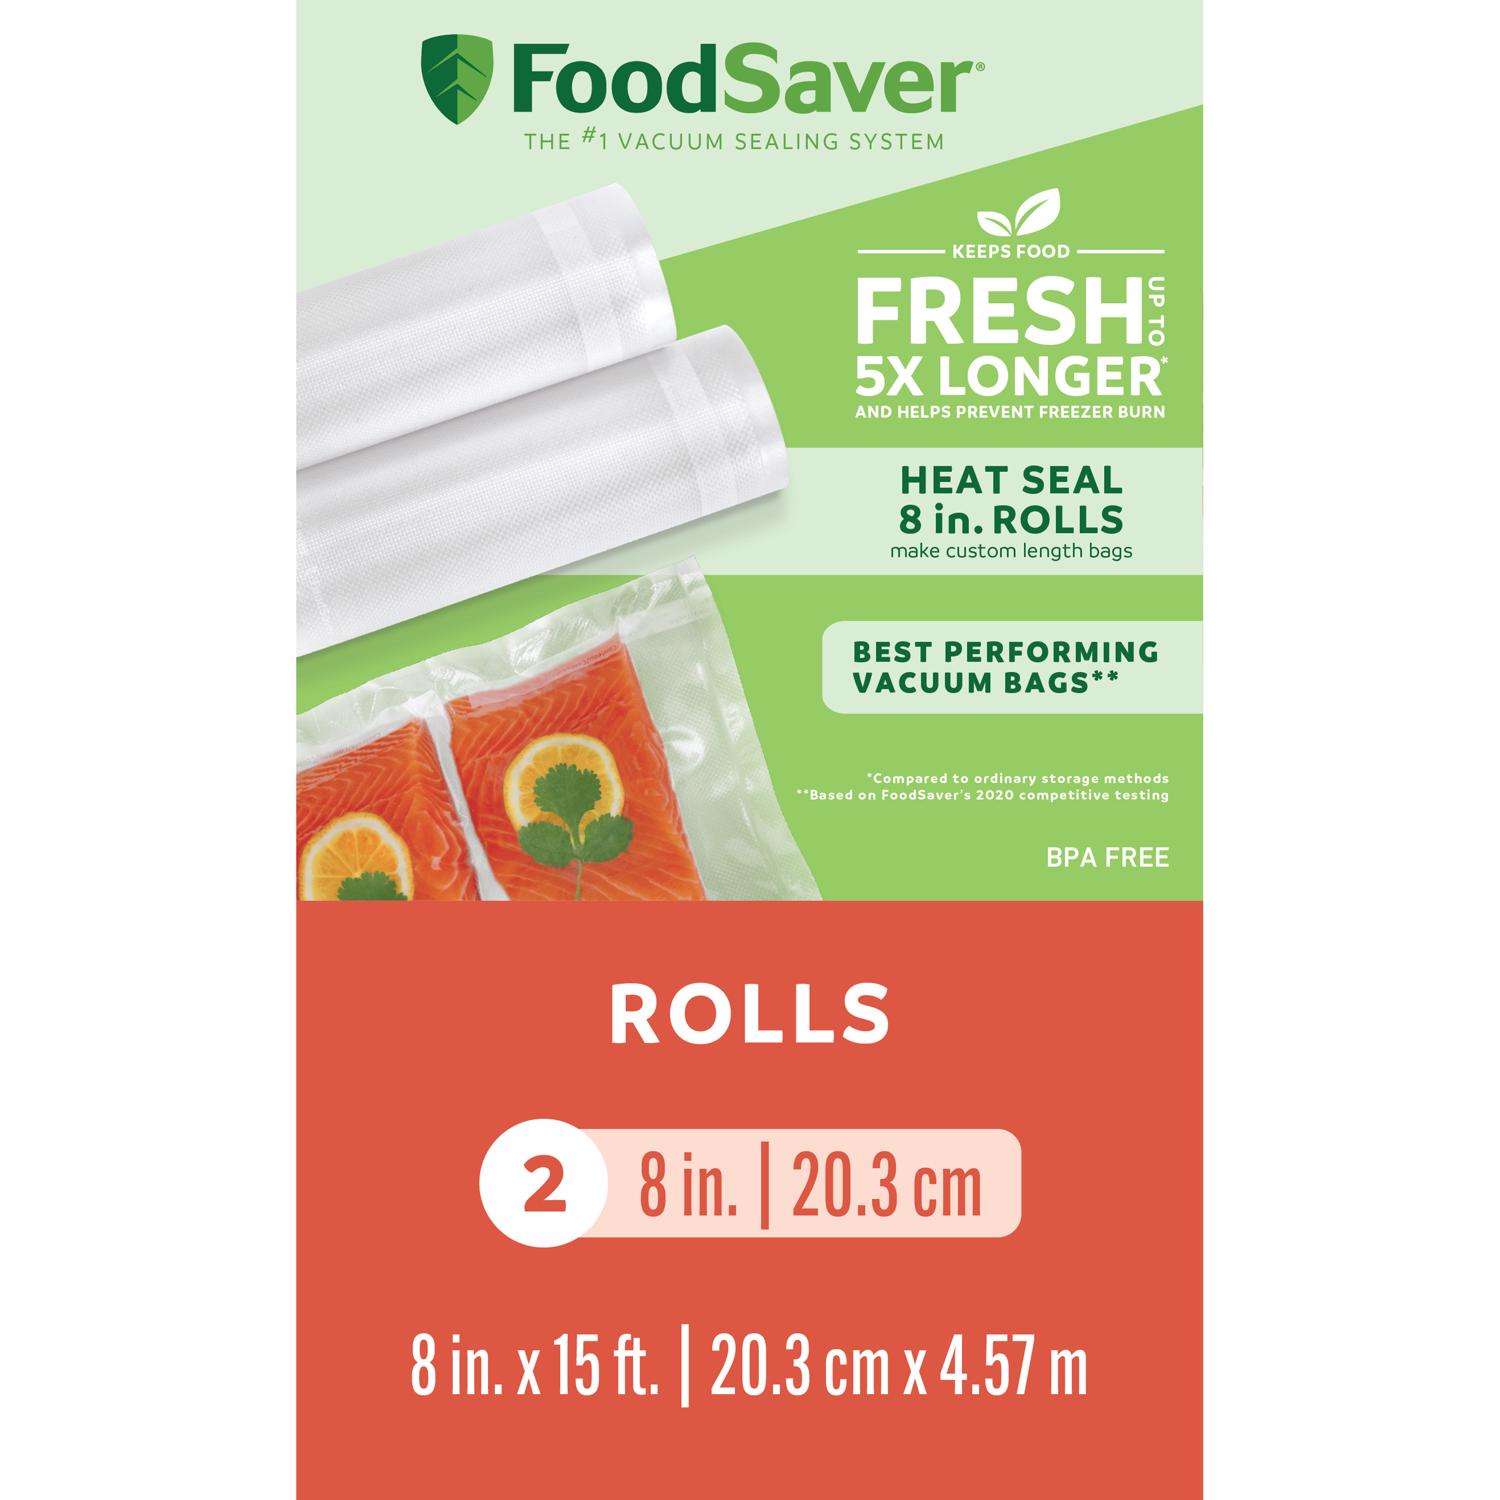  Special Value Combo Pack FoodSaver 8 & 11 Rolls & 36